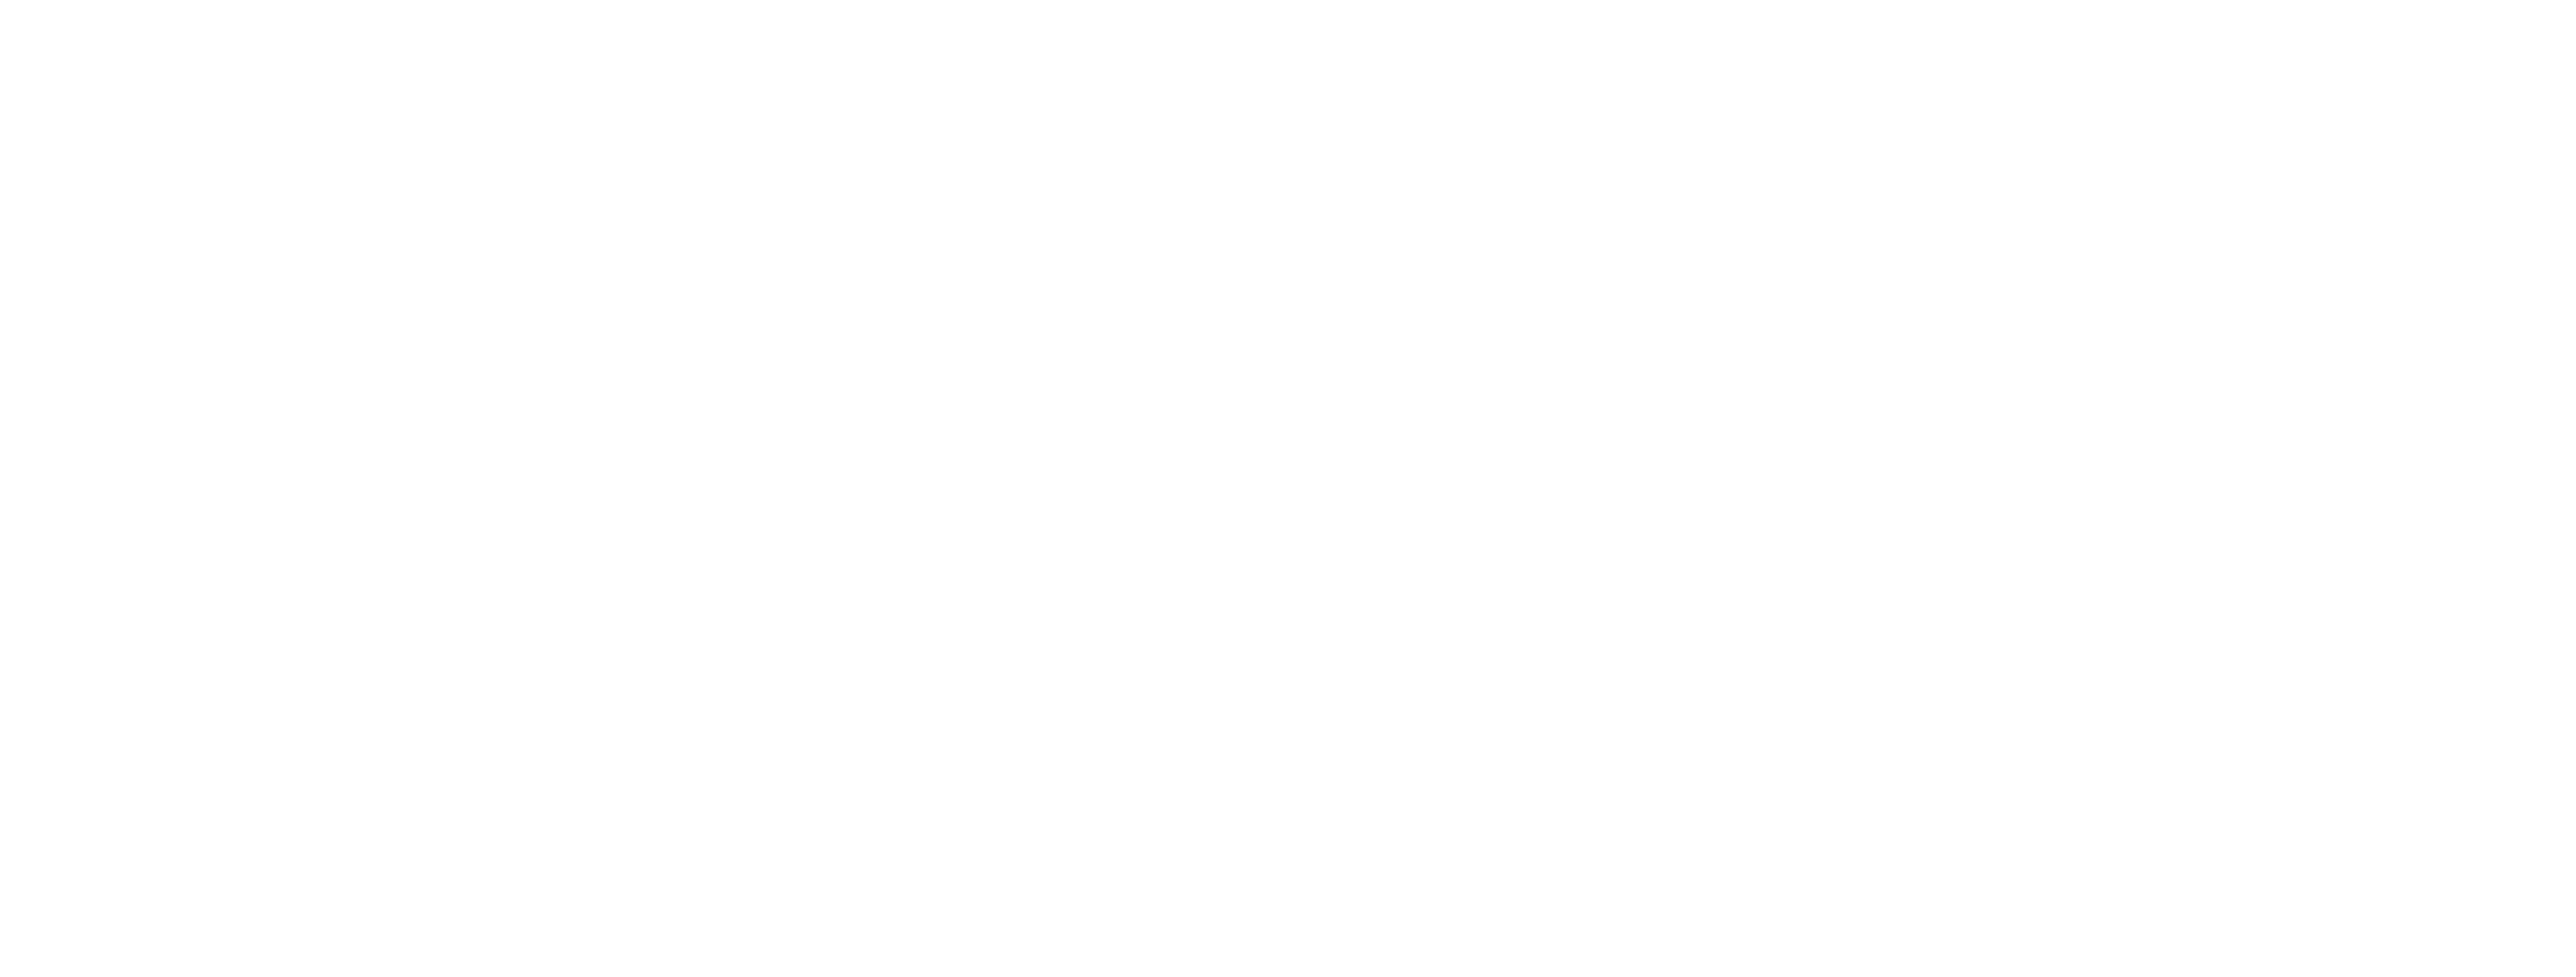 The Whispers logo